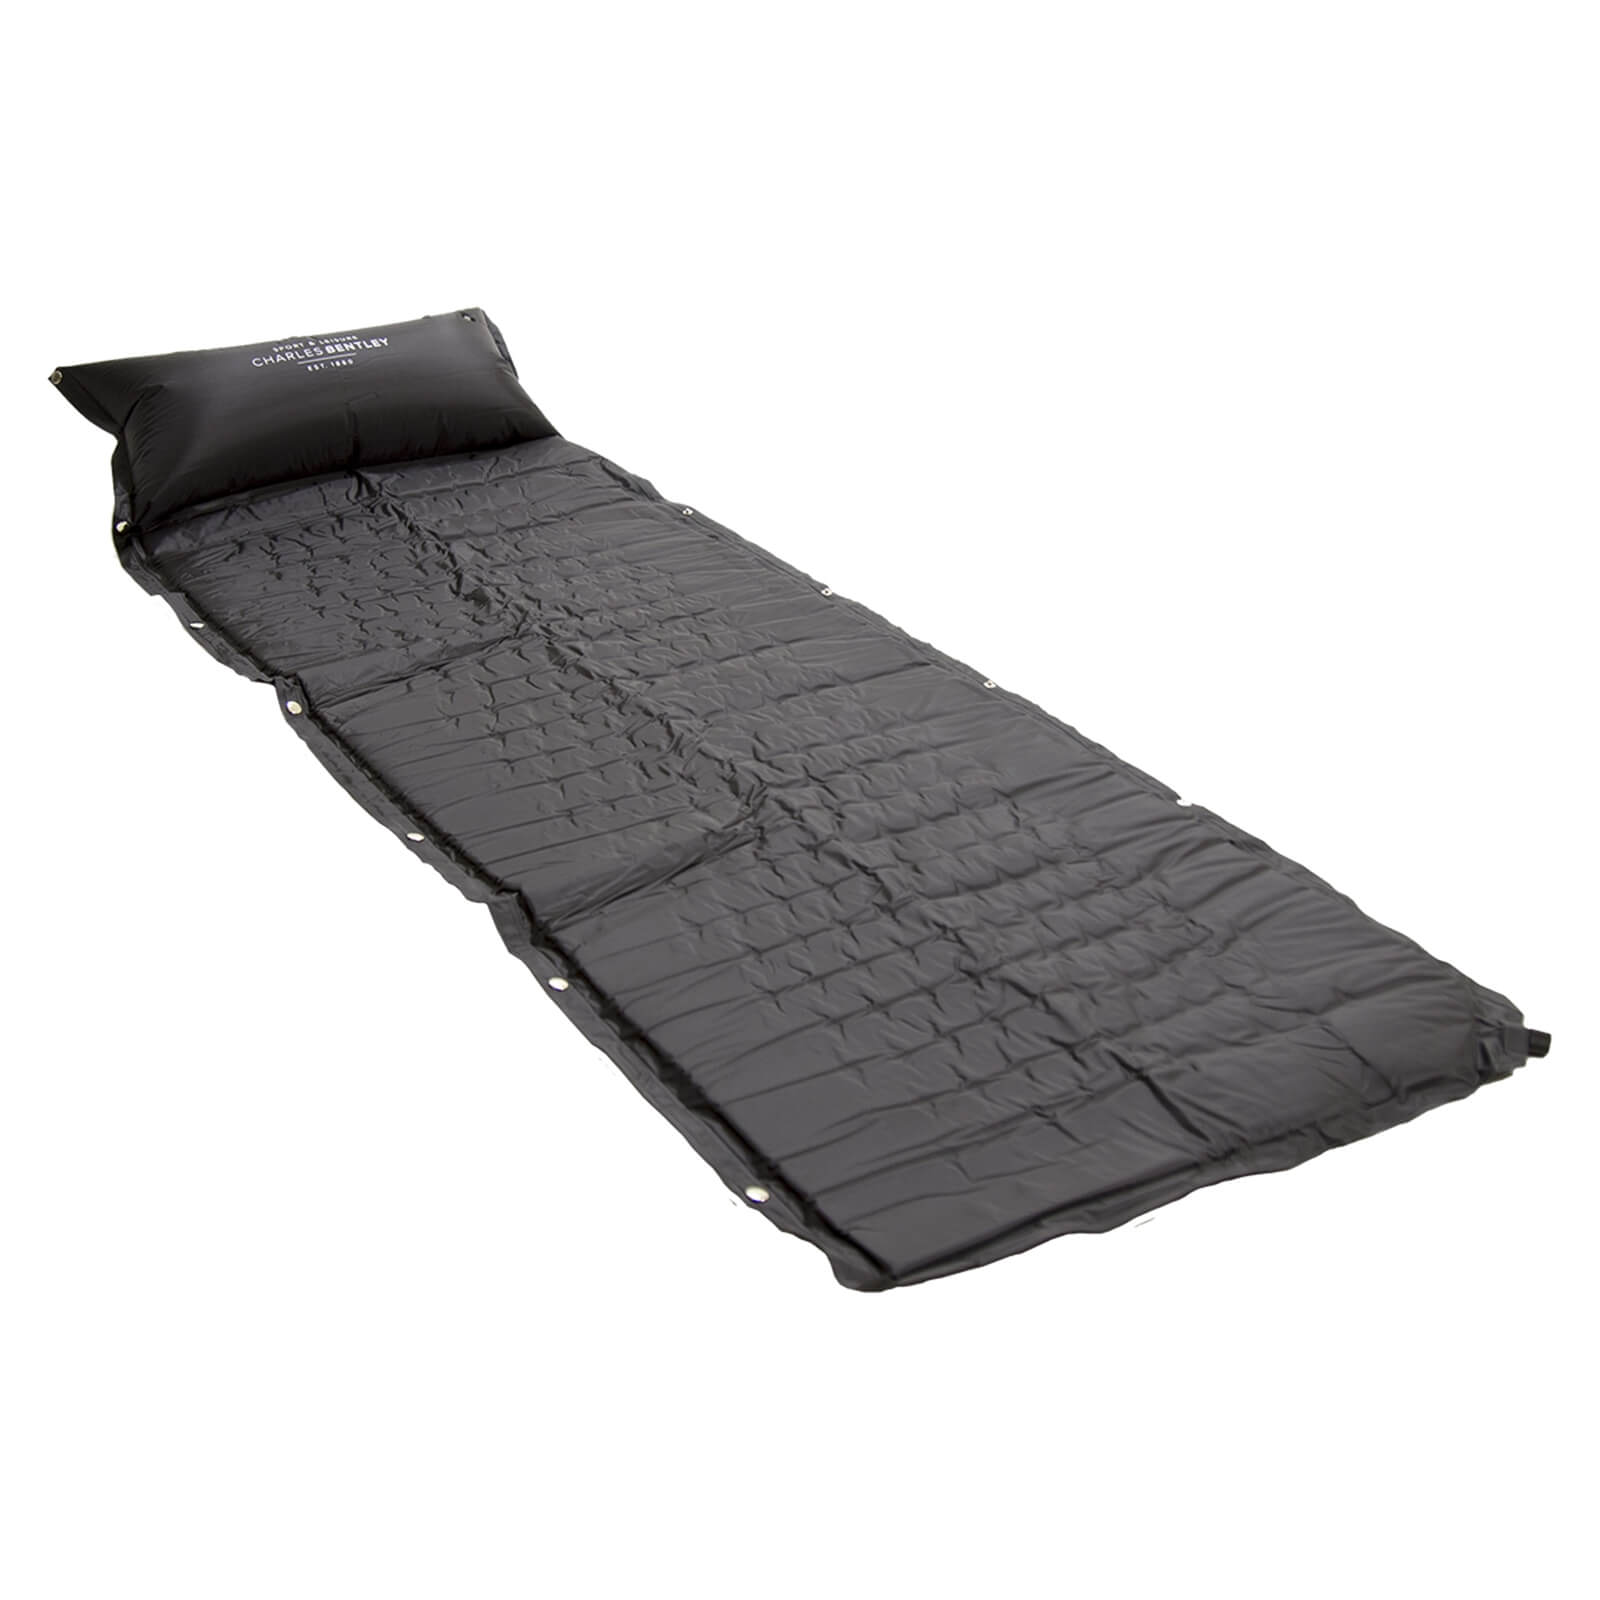 Charles Bentley Self Inflating Single Rollup Camping Mat with Pillow - Black